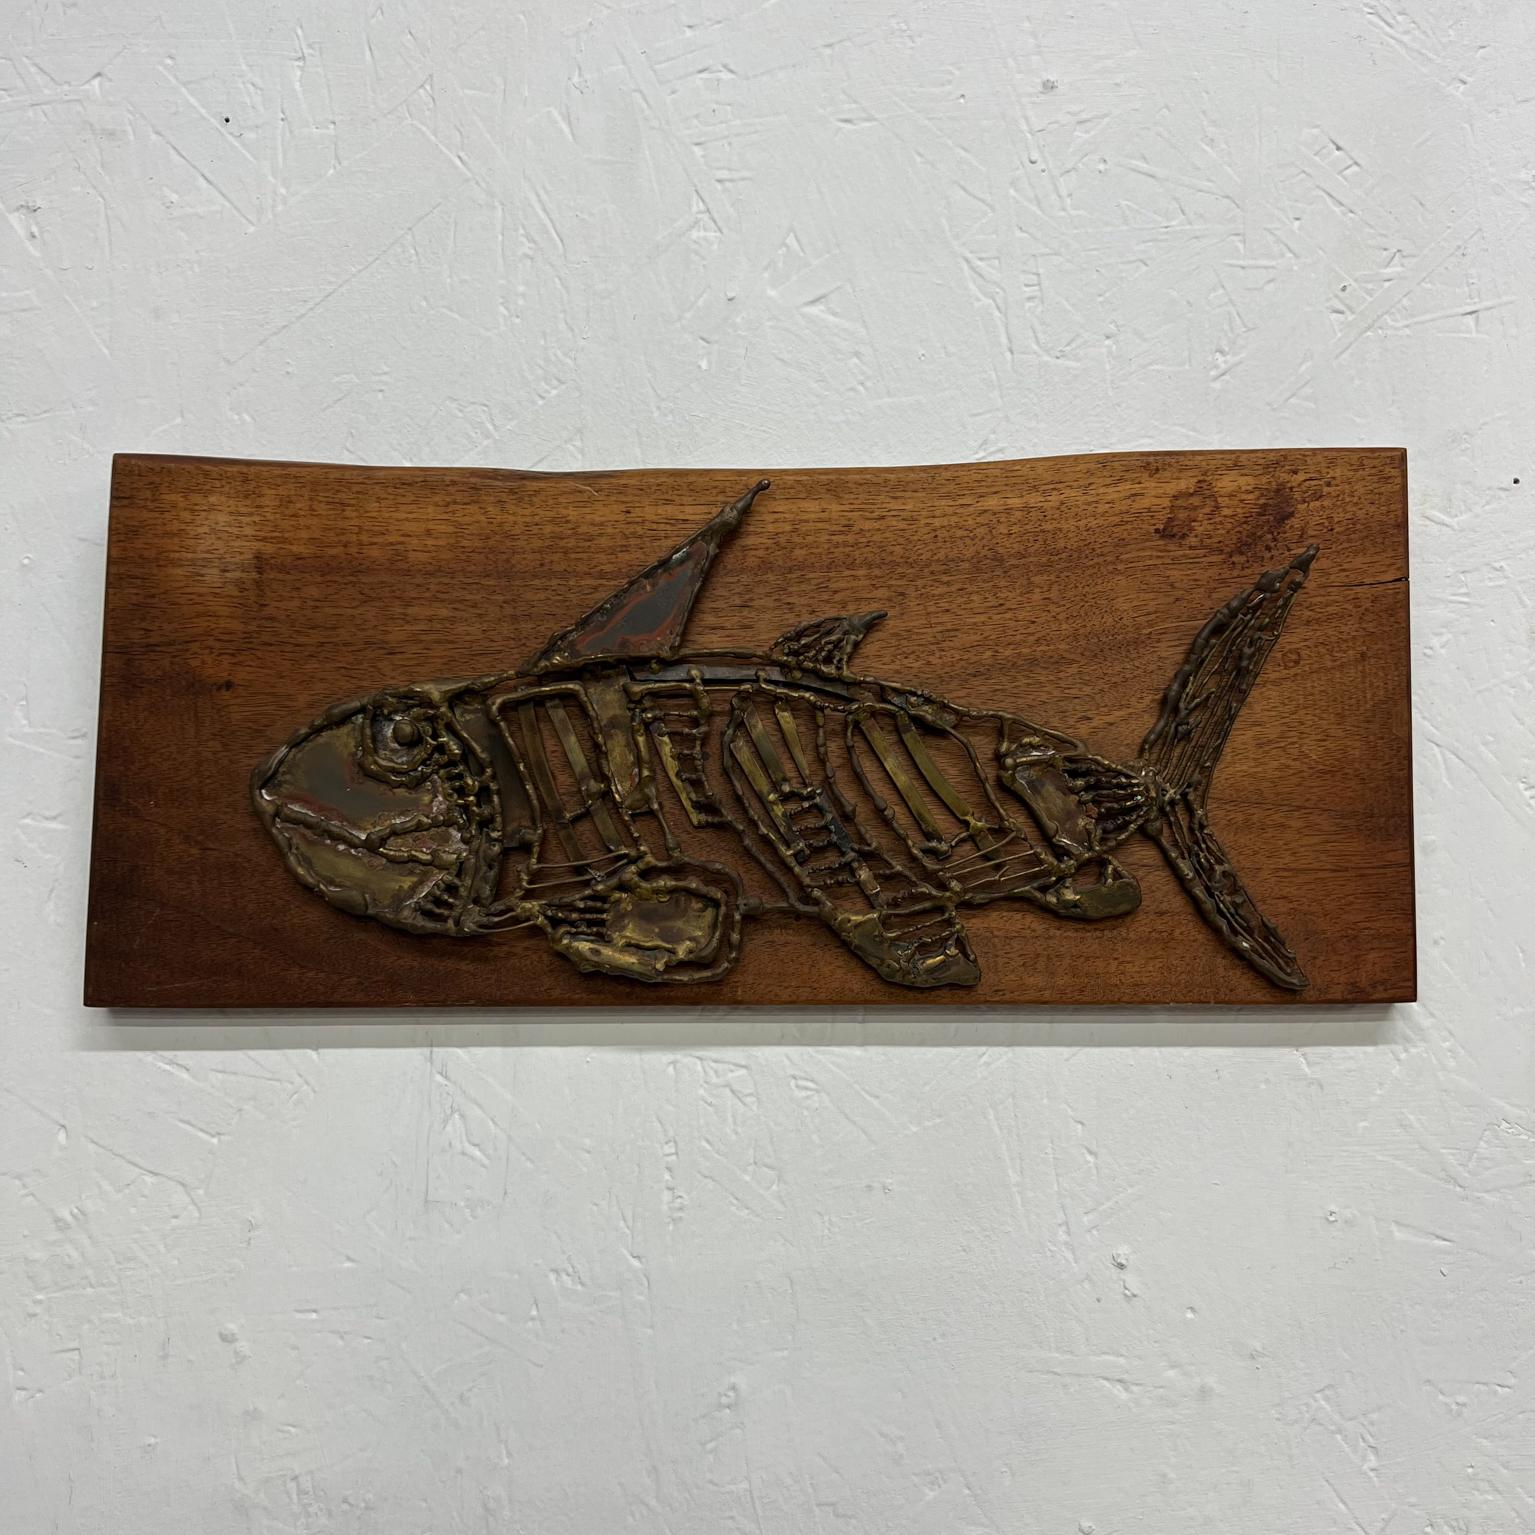 1970s Modern Brutalist Wall Art Bronzed Metal Fish on Wood Plaque In Good Condition For Sale In Chula Vista, CA